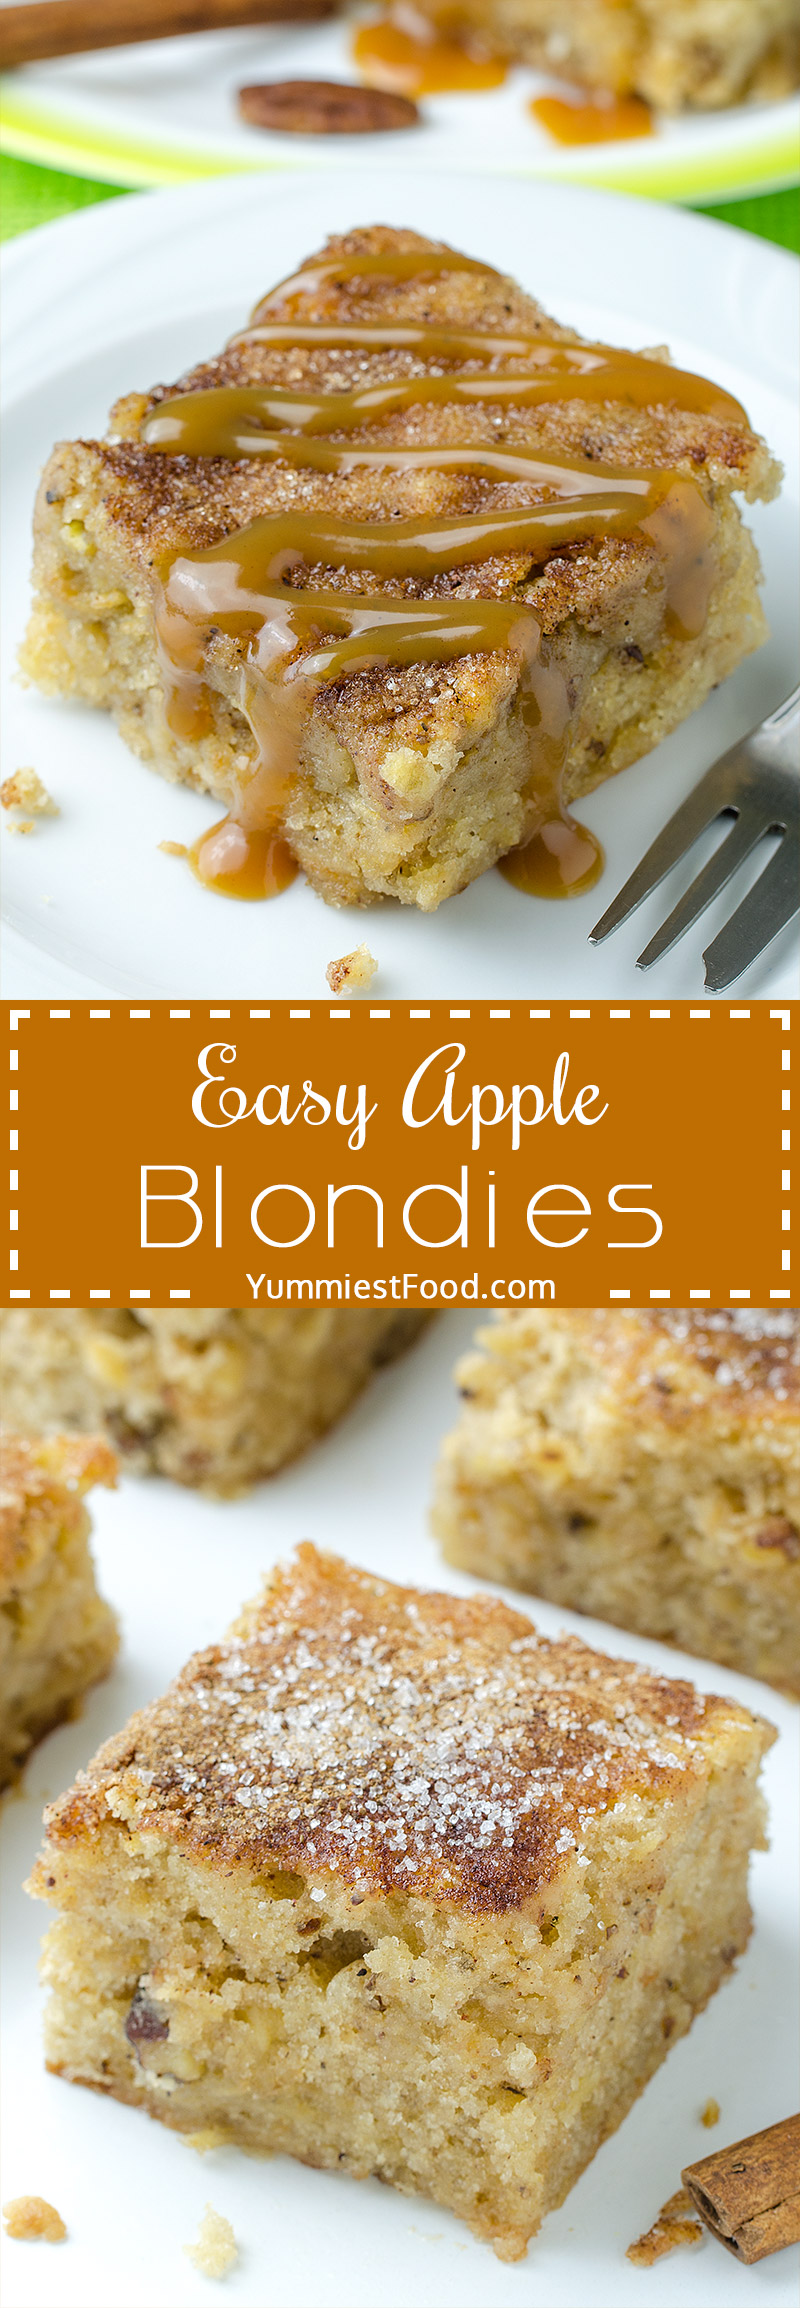 Easy Apple Blondies - You can make these Easy Apple Blondies for a very short time and you can do it with ingredients you already have on hand. Perfect and delicious fall dessert.